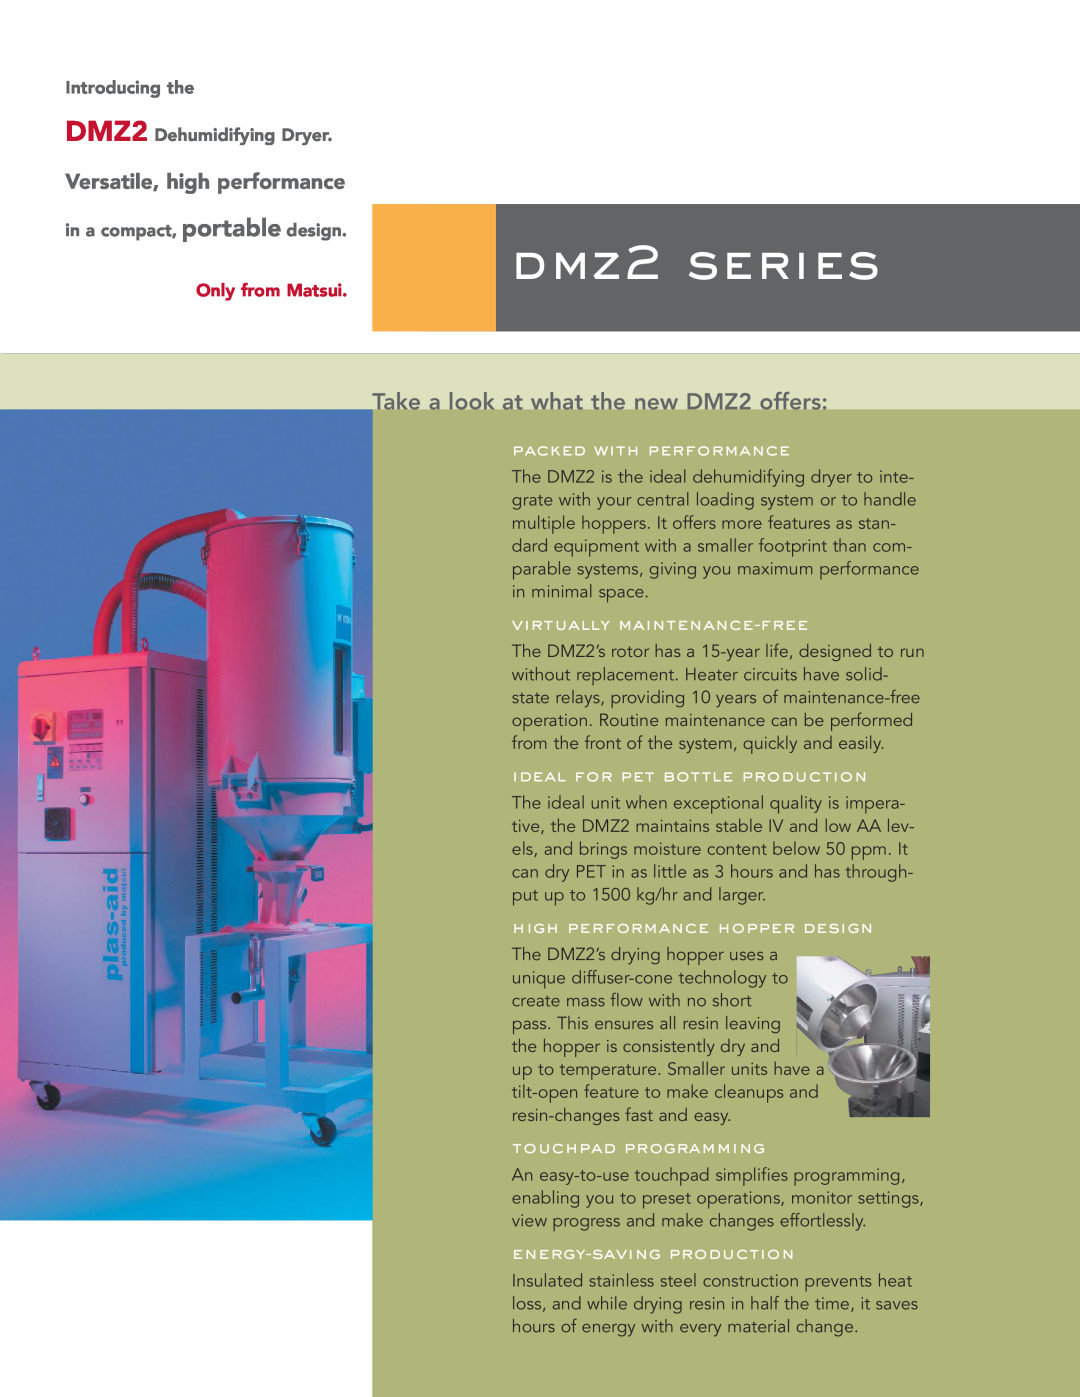 Matsui America DMZ2 Series manual dmz2 series, Take a look at what the new DMZ2 offers, Versatile, high performance 